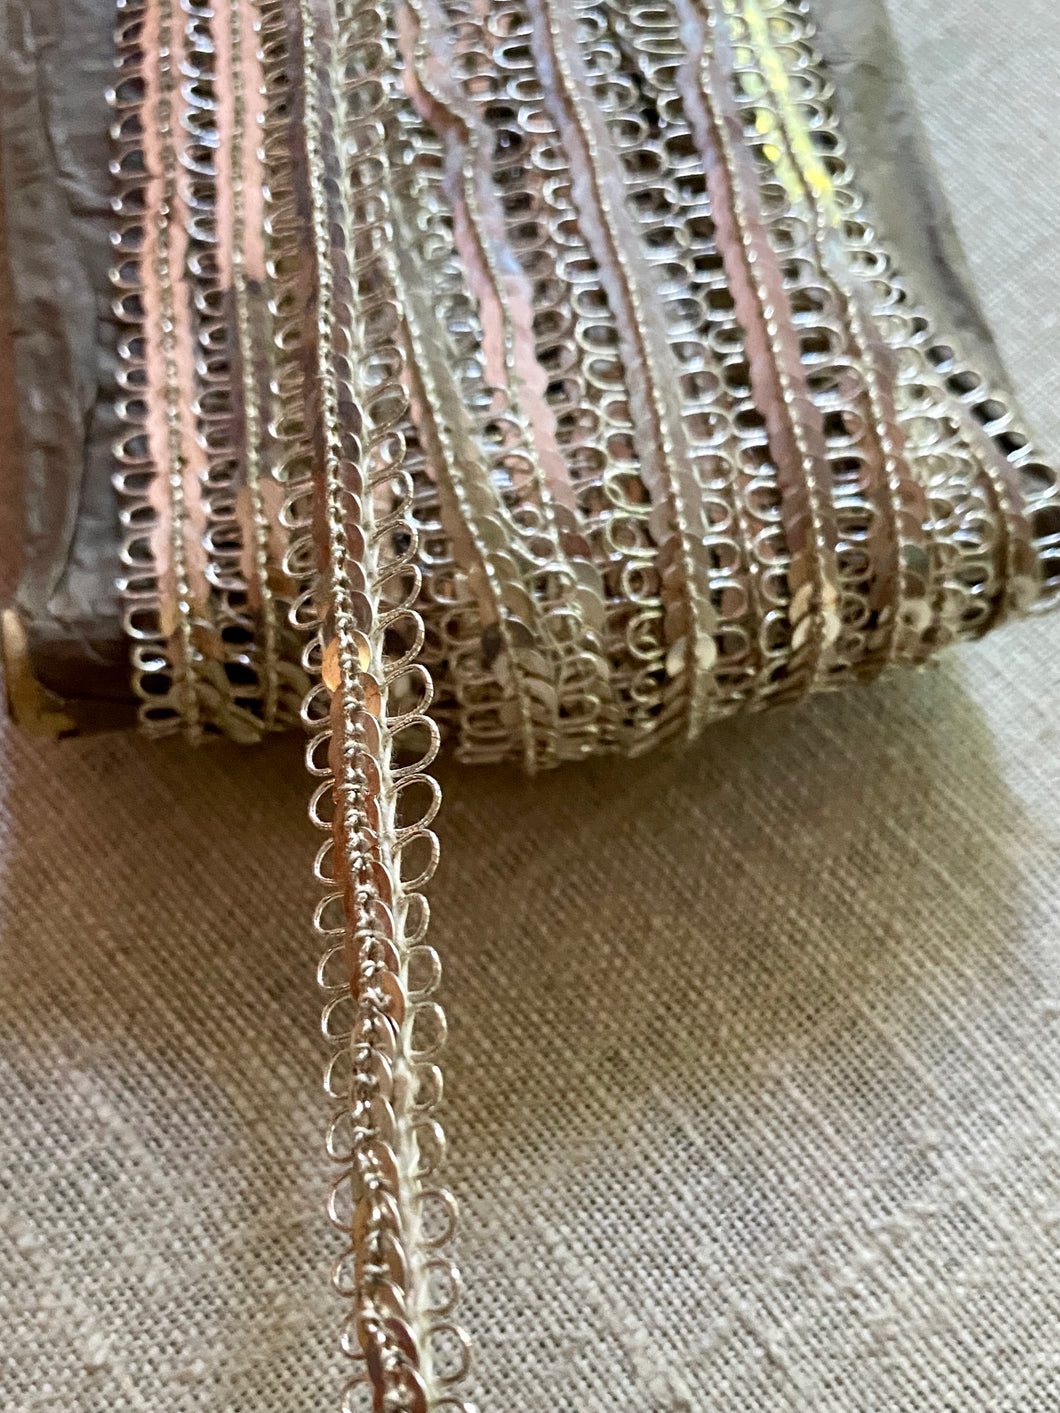 Antique French Silver Metal Sequin and Cord Trim